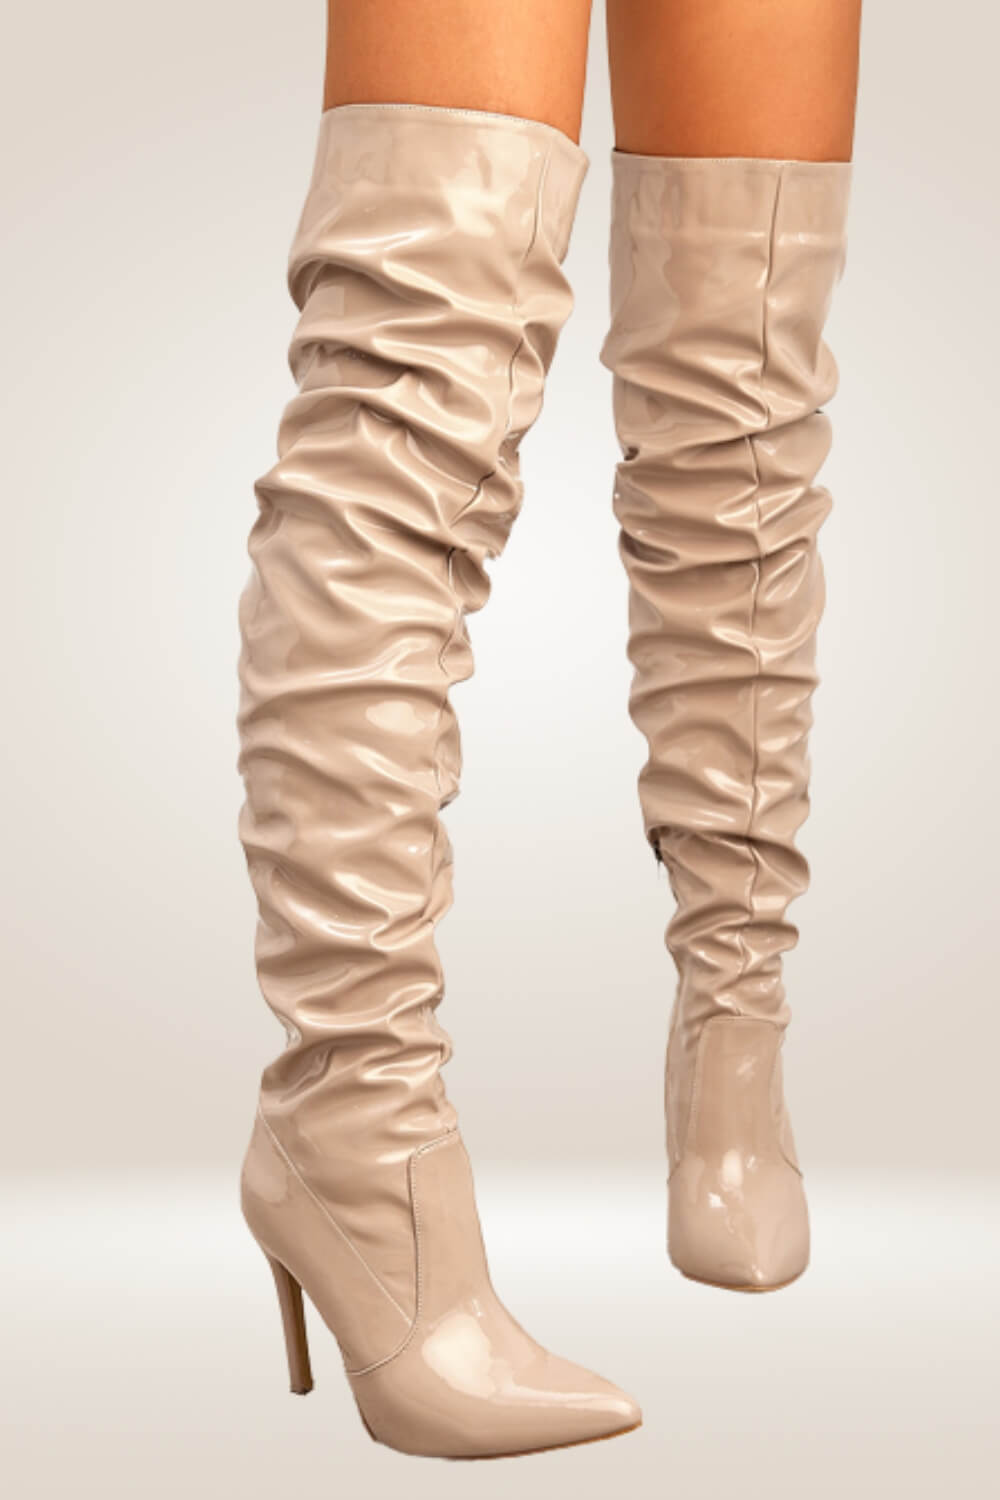 Shiny Tan Over The Knee Boots - TGC Boutique - Boots